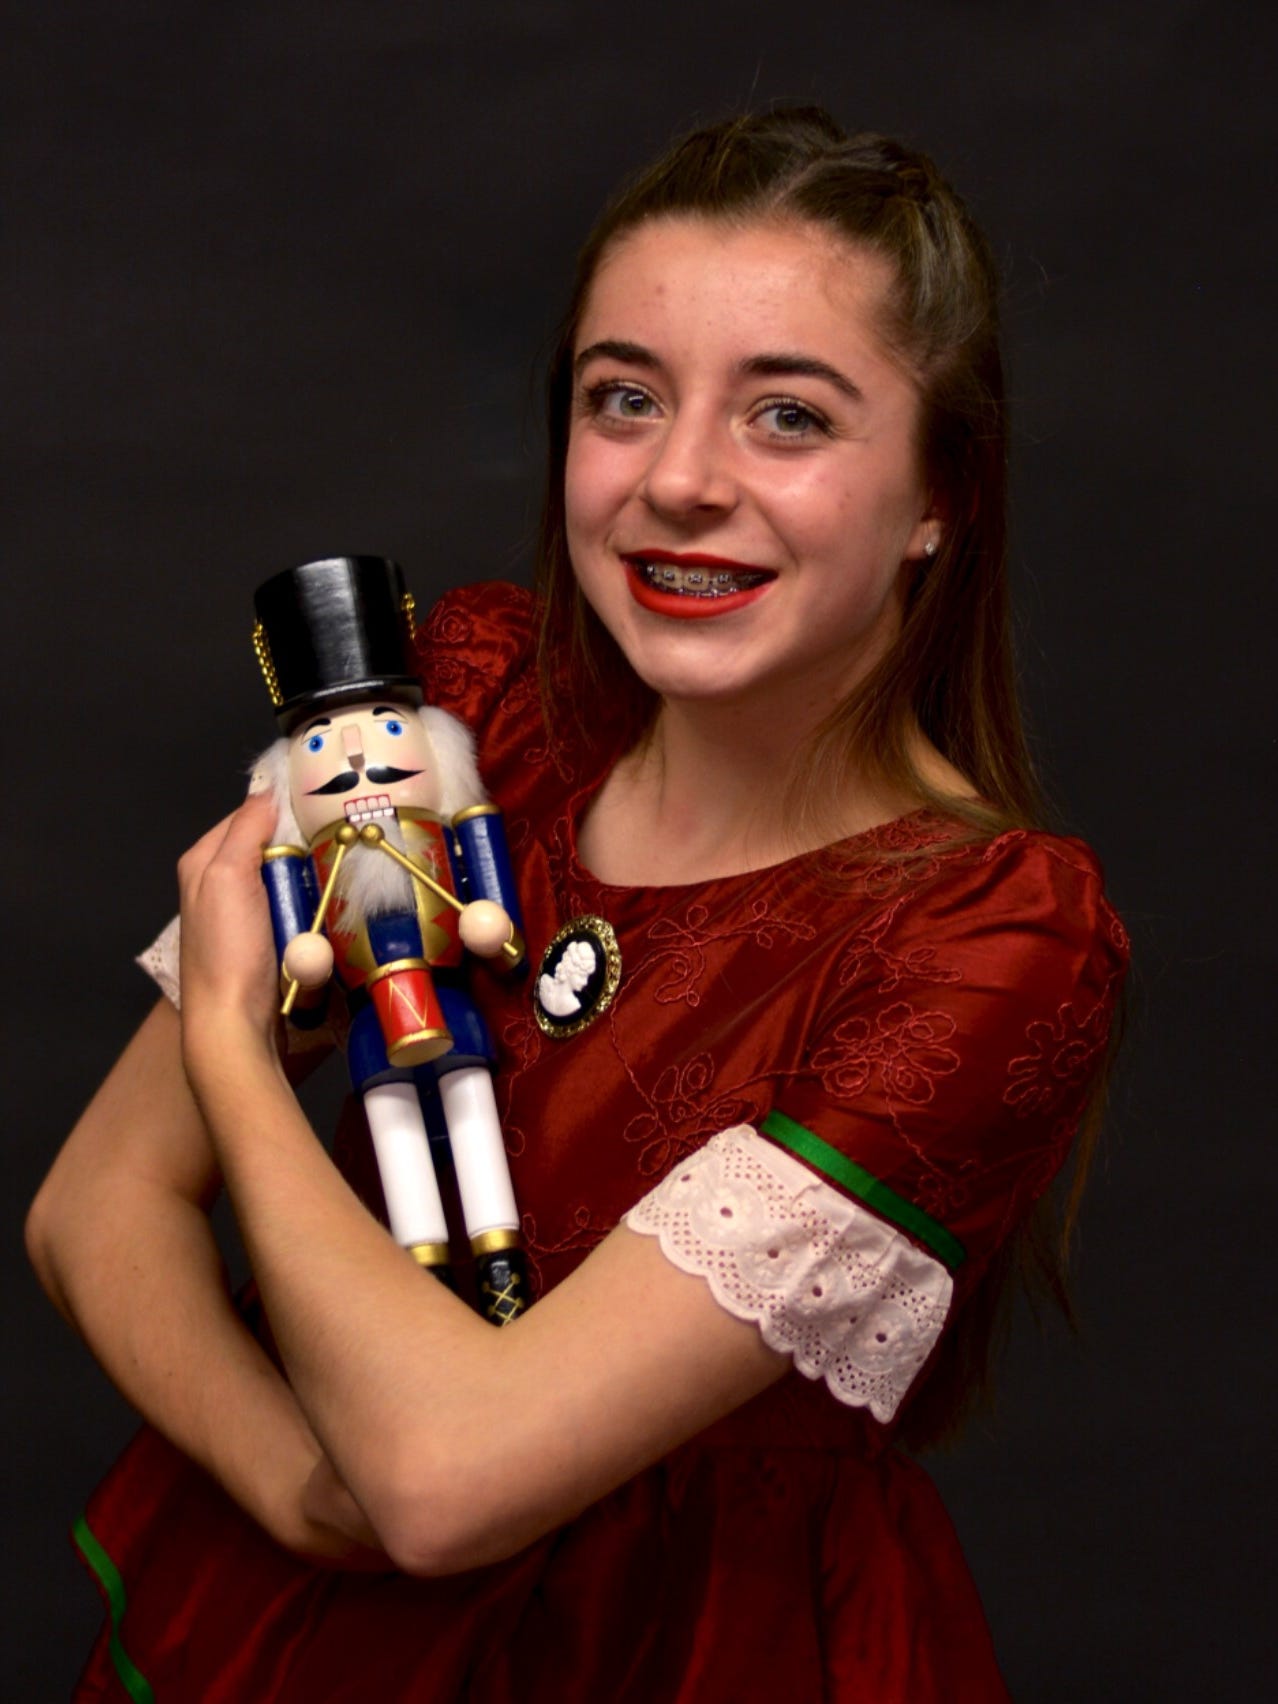 Megan Faherty appears in the Mann Dance Academy production of "The Nutcracker" this weekend at San Juan College.